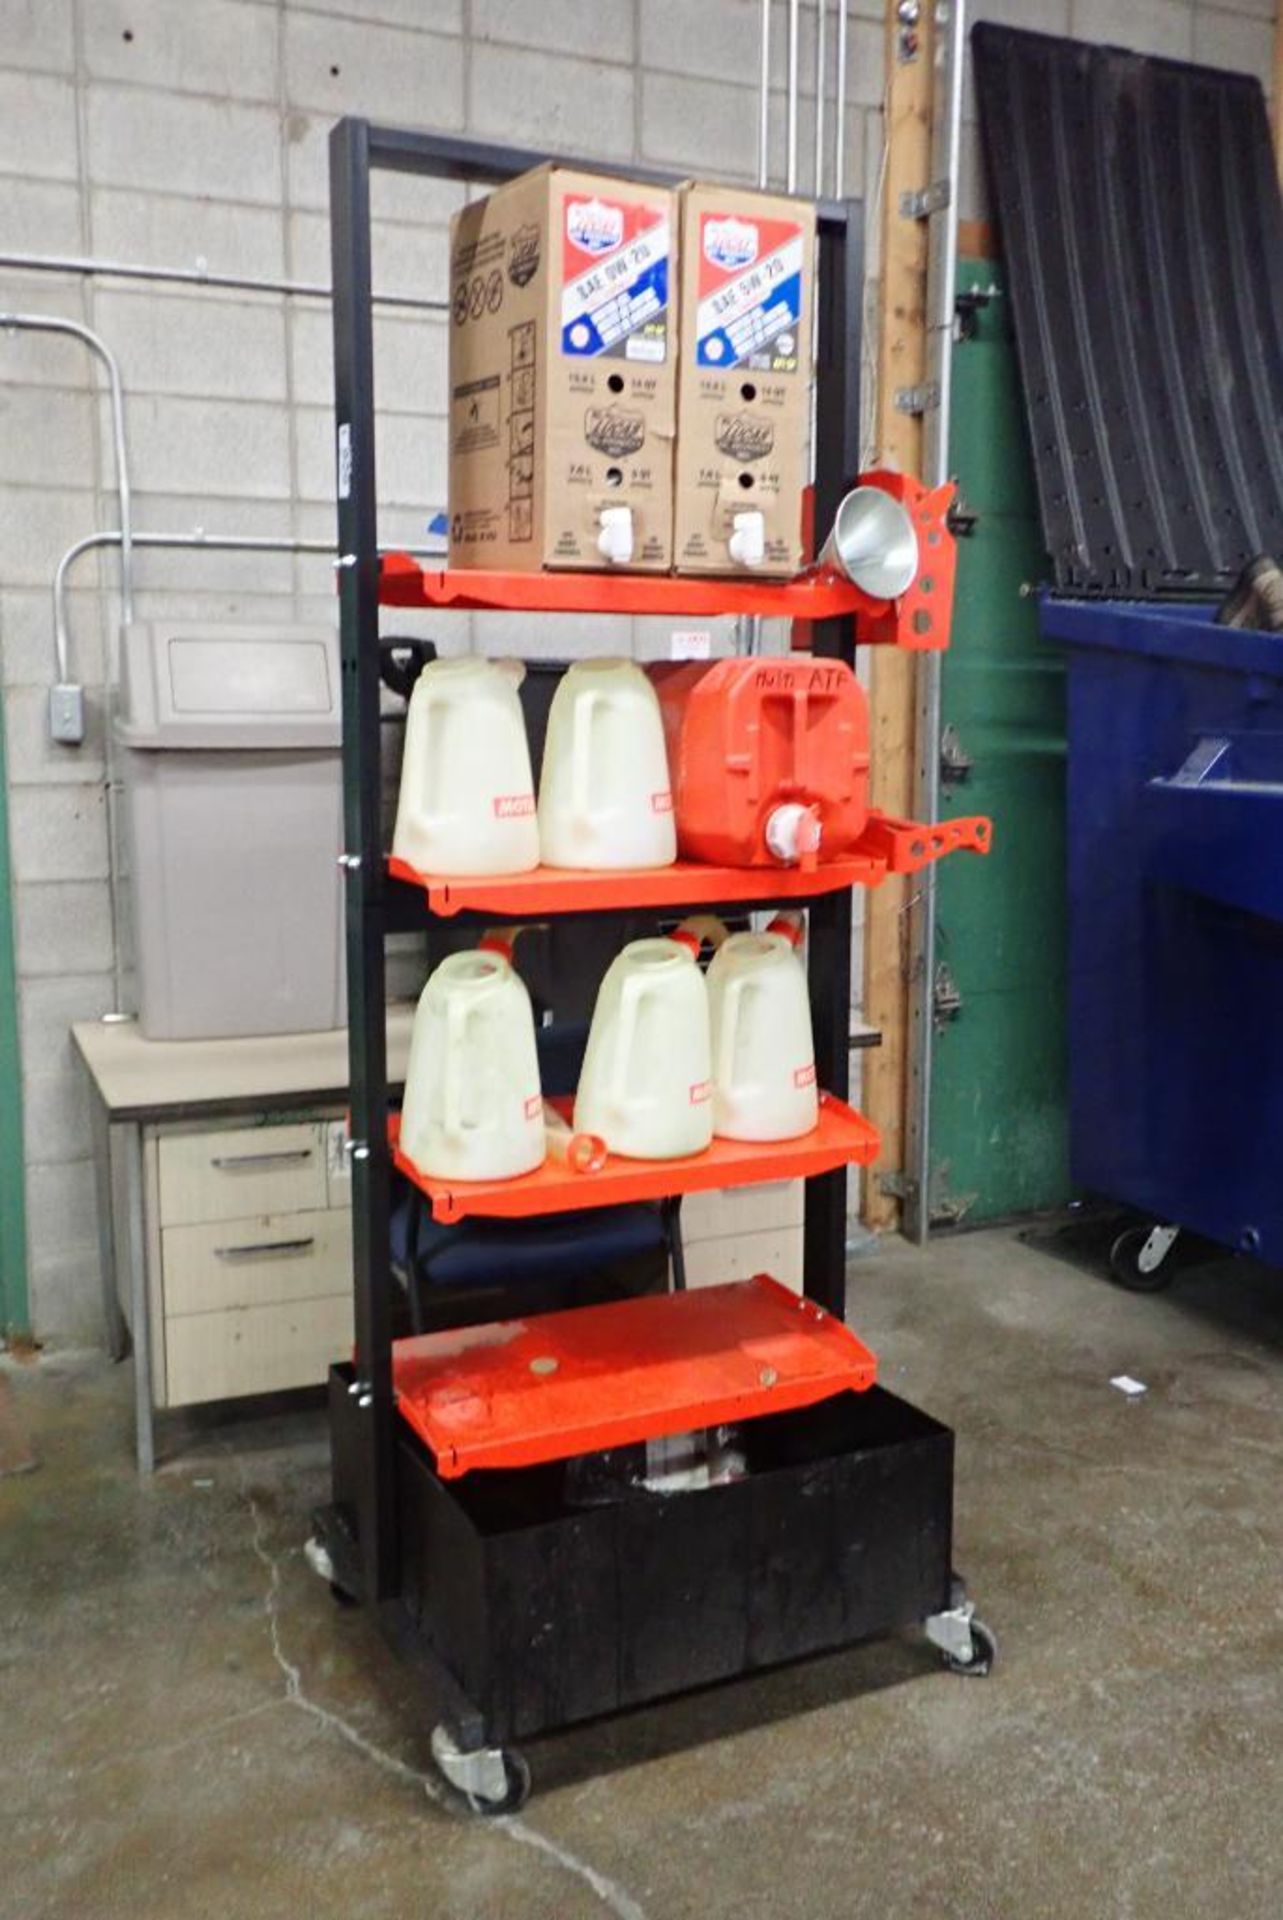 Double Sided 4-tier Mobile Cart w/ Drip Tray, Jugs and Oil.